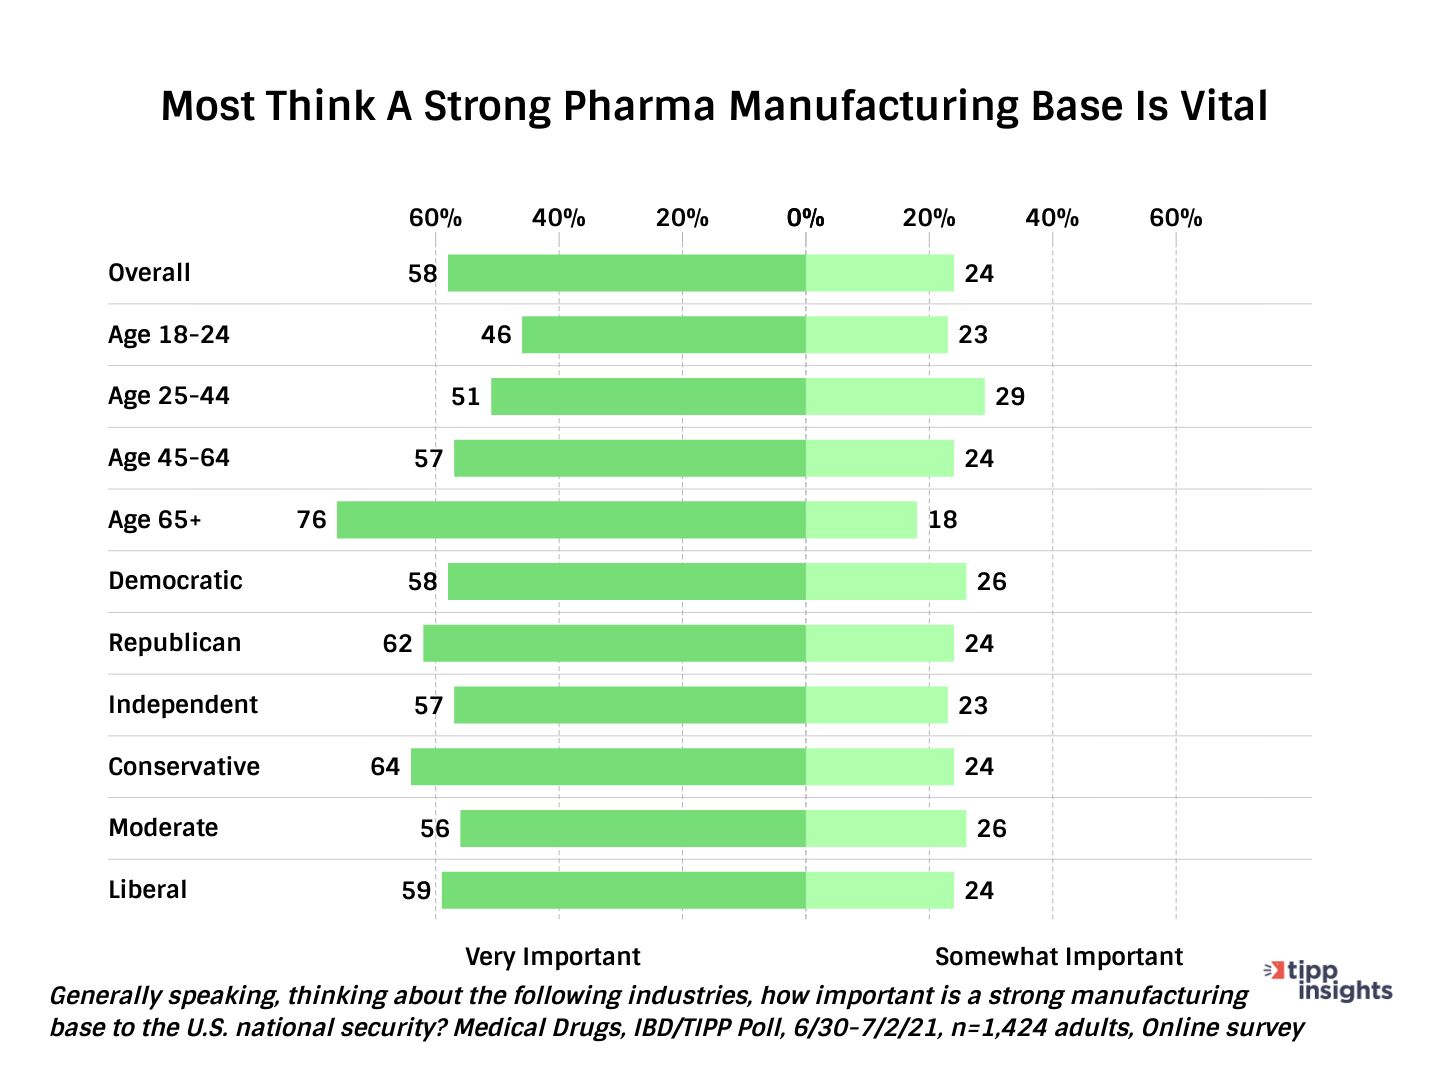 Importance of a strong drugs manufacturing base for national security